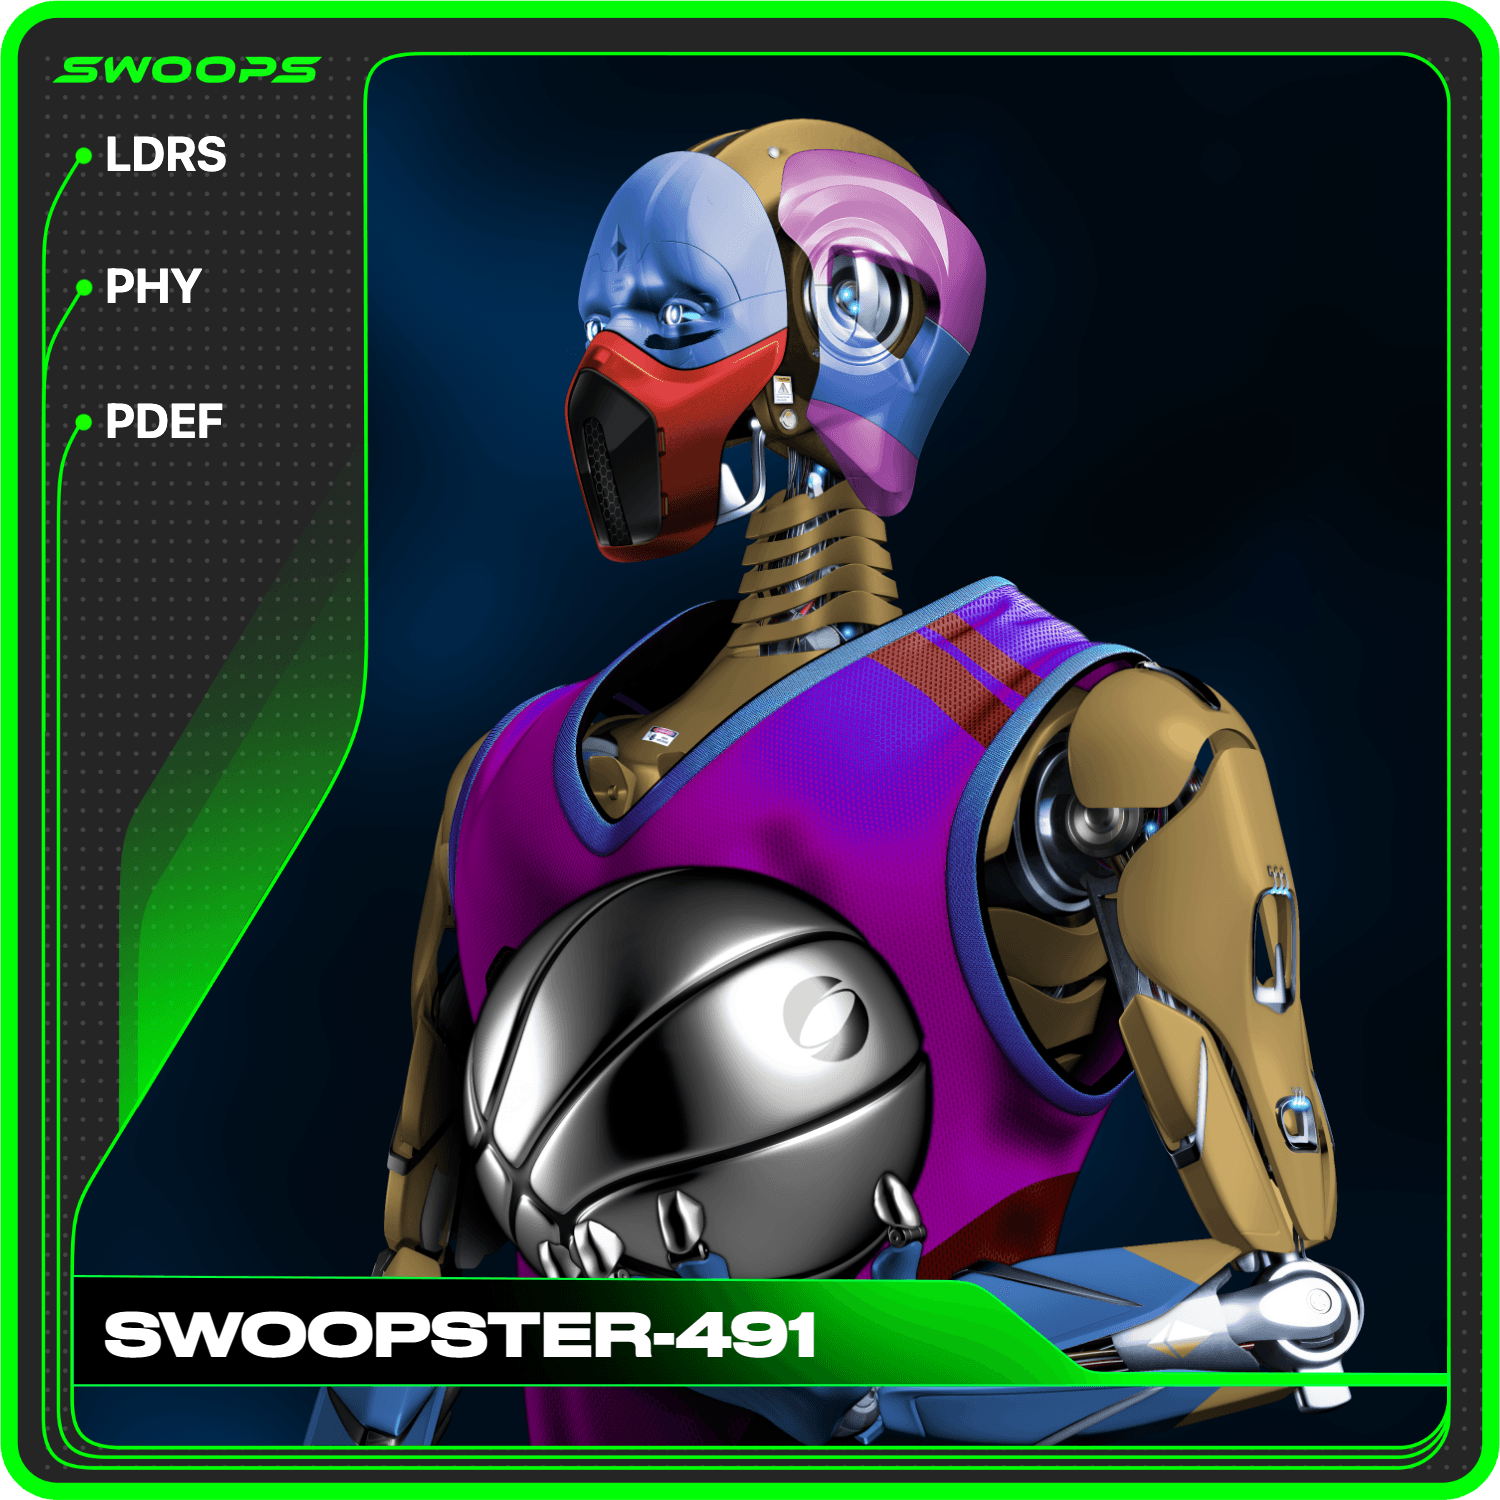 SWOOPSTER-491